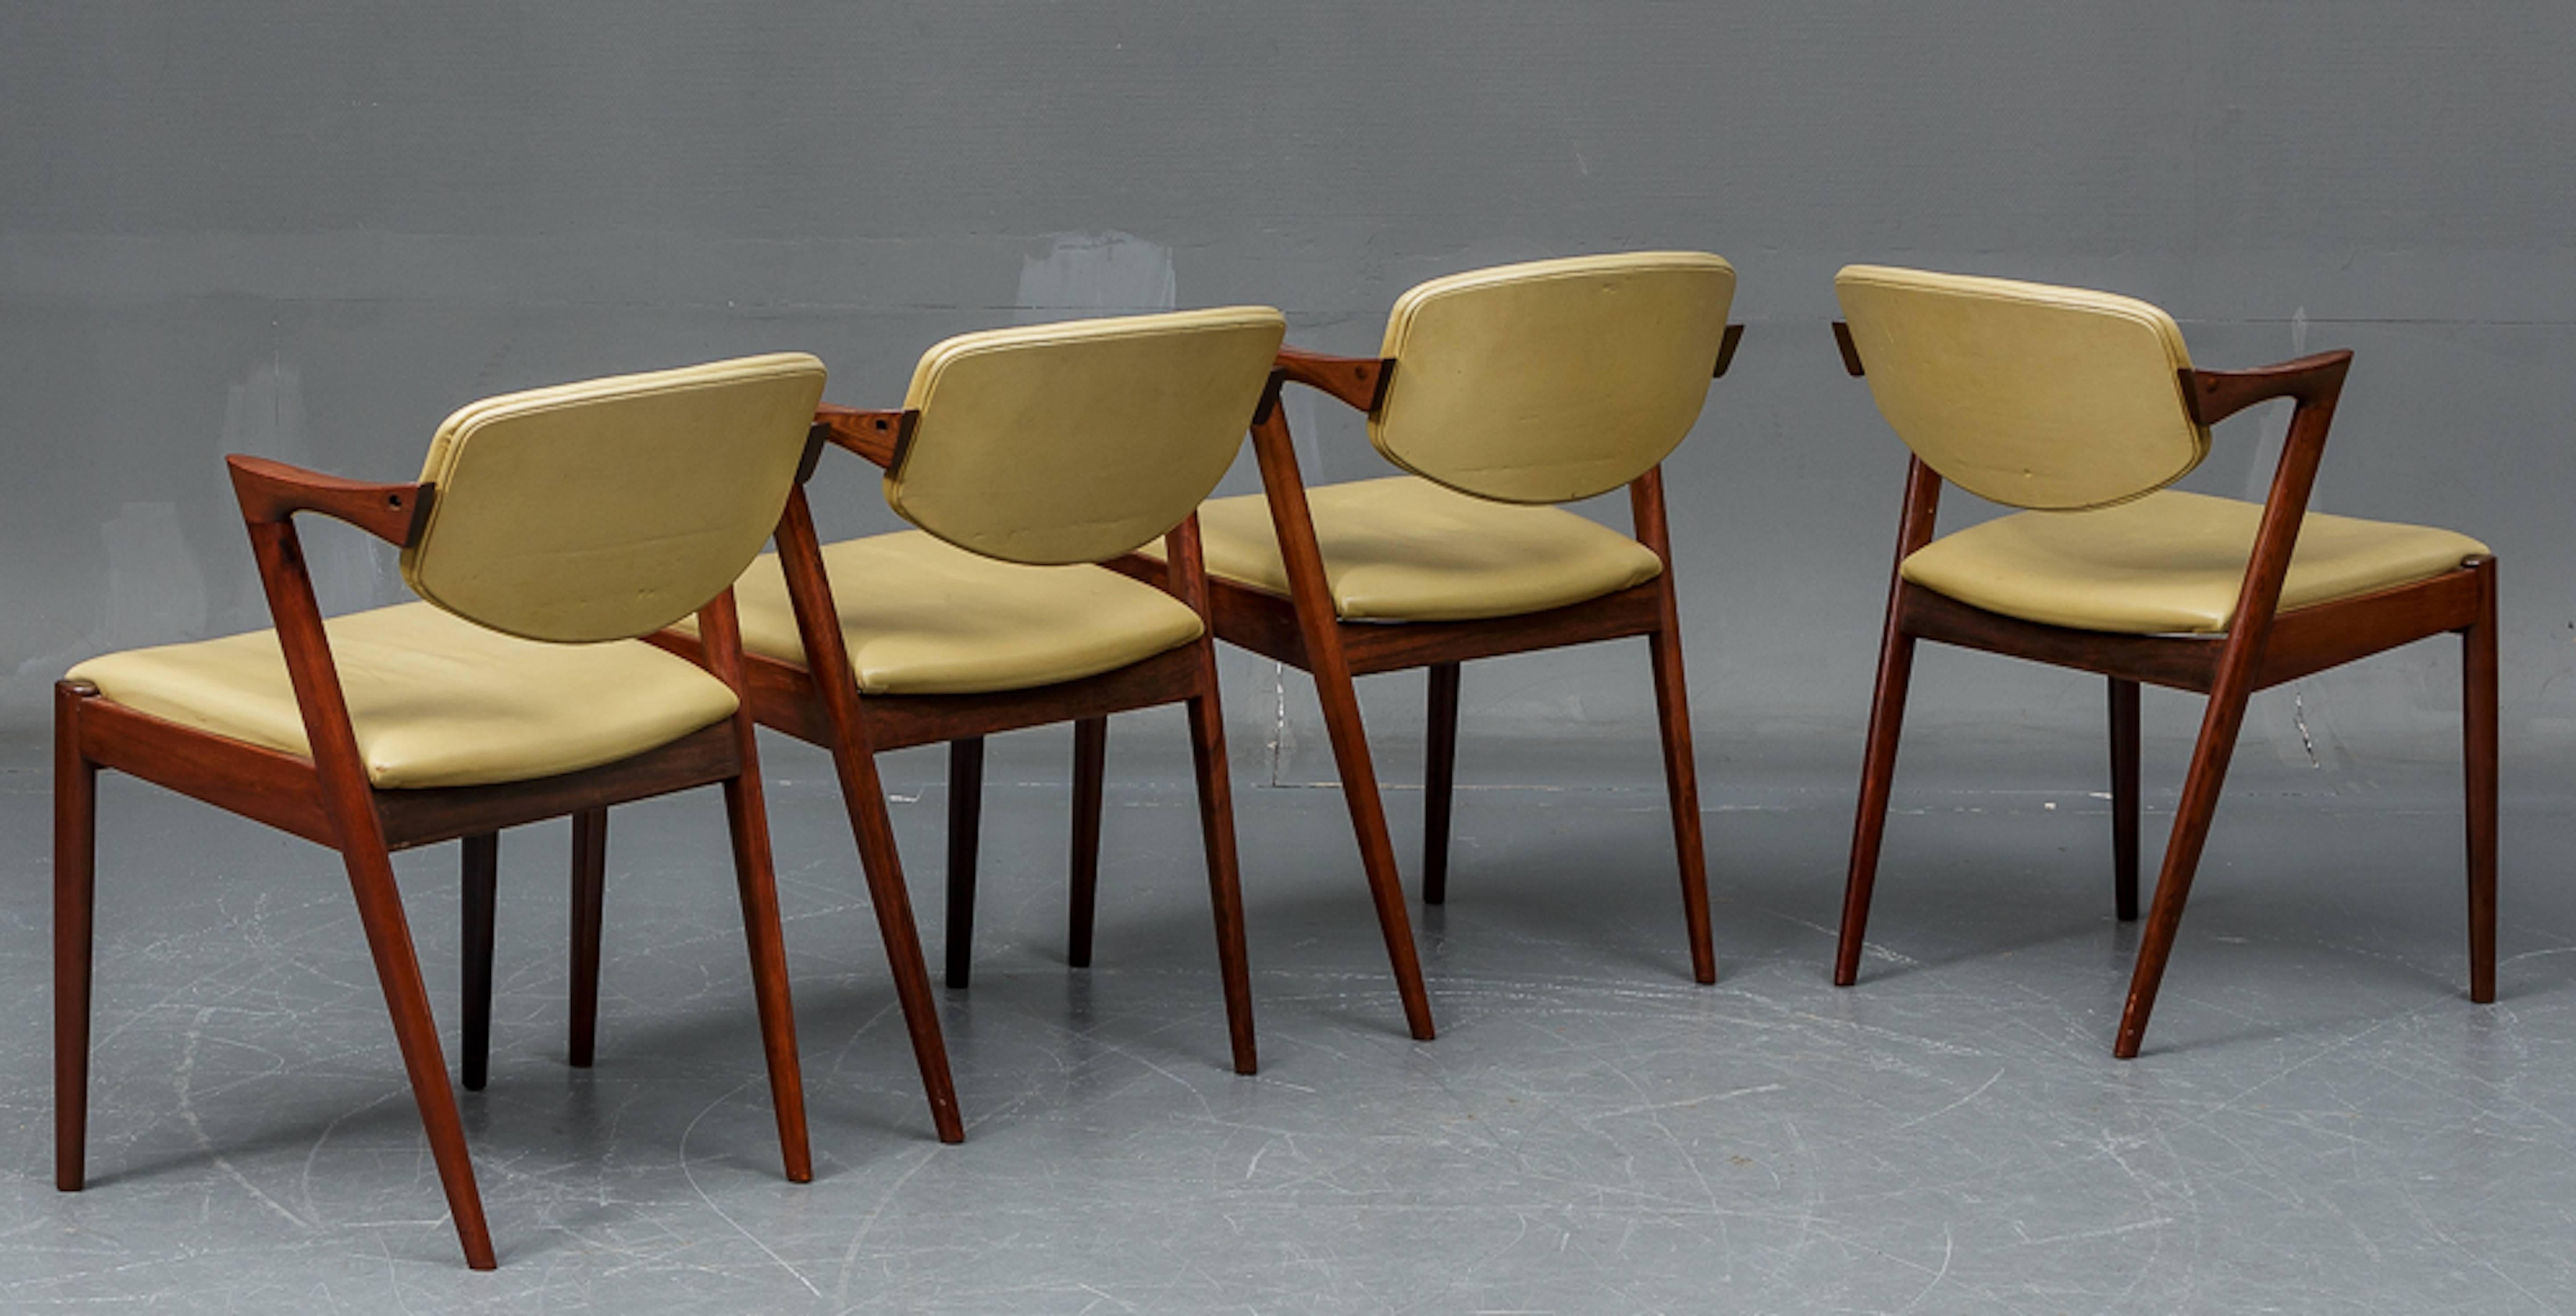 Four Kai Kristiansen rosewood dining chairs. Model 42. Rosewood framework , seats and back upholstered in original light green leather.Excellent condition .